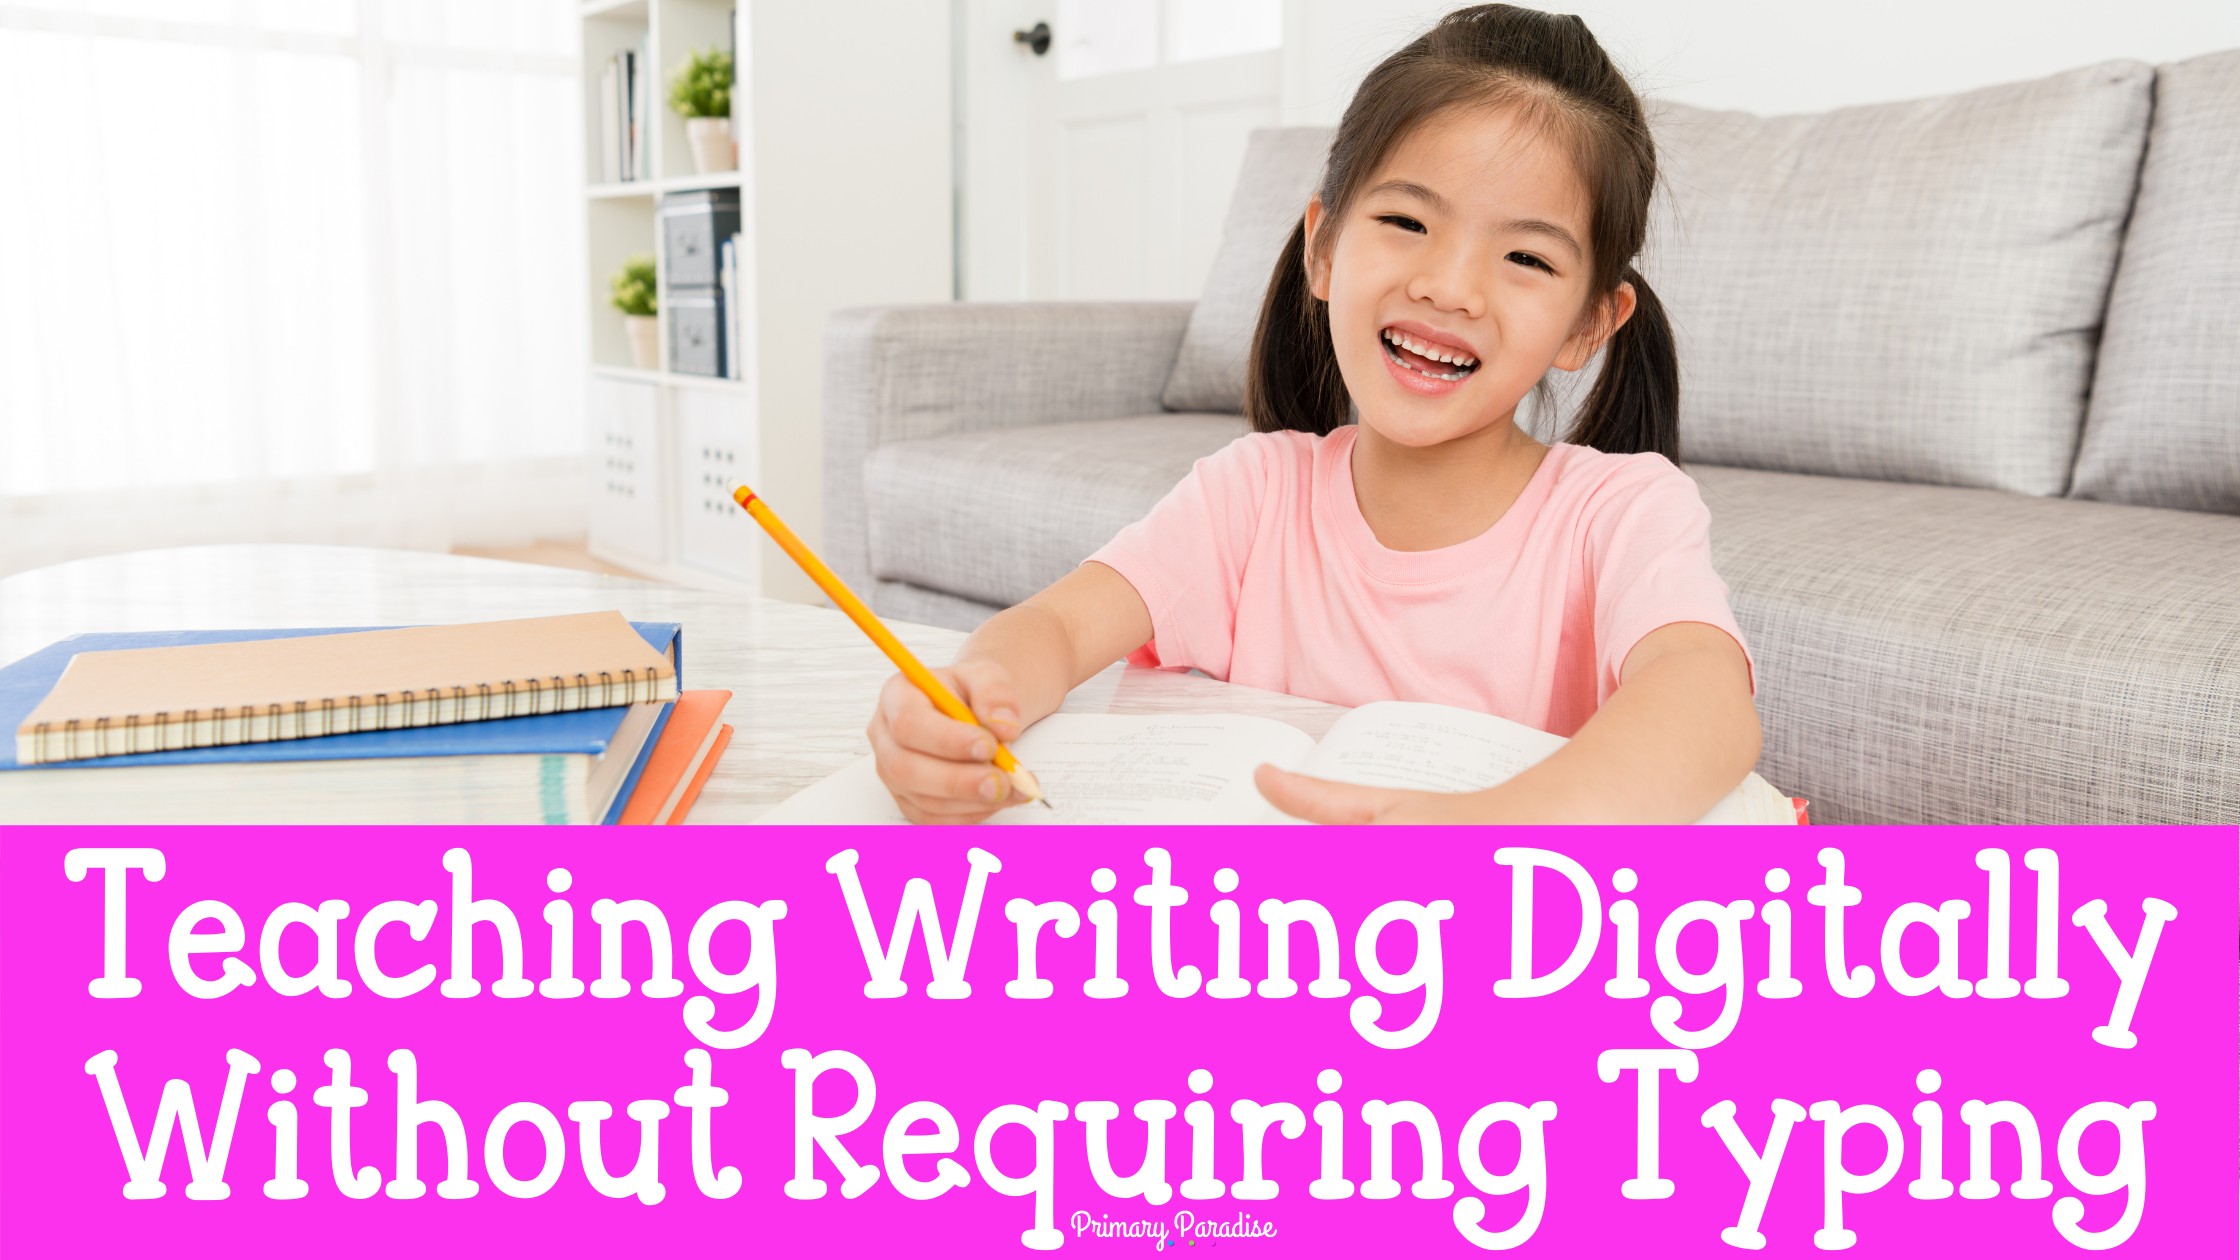 Type Free Writing During Distance Learning for Primary Students